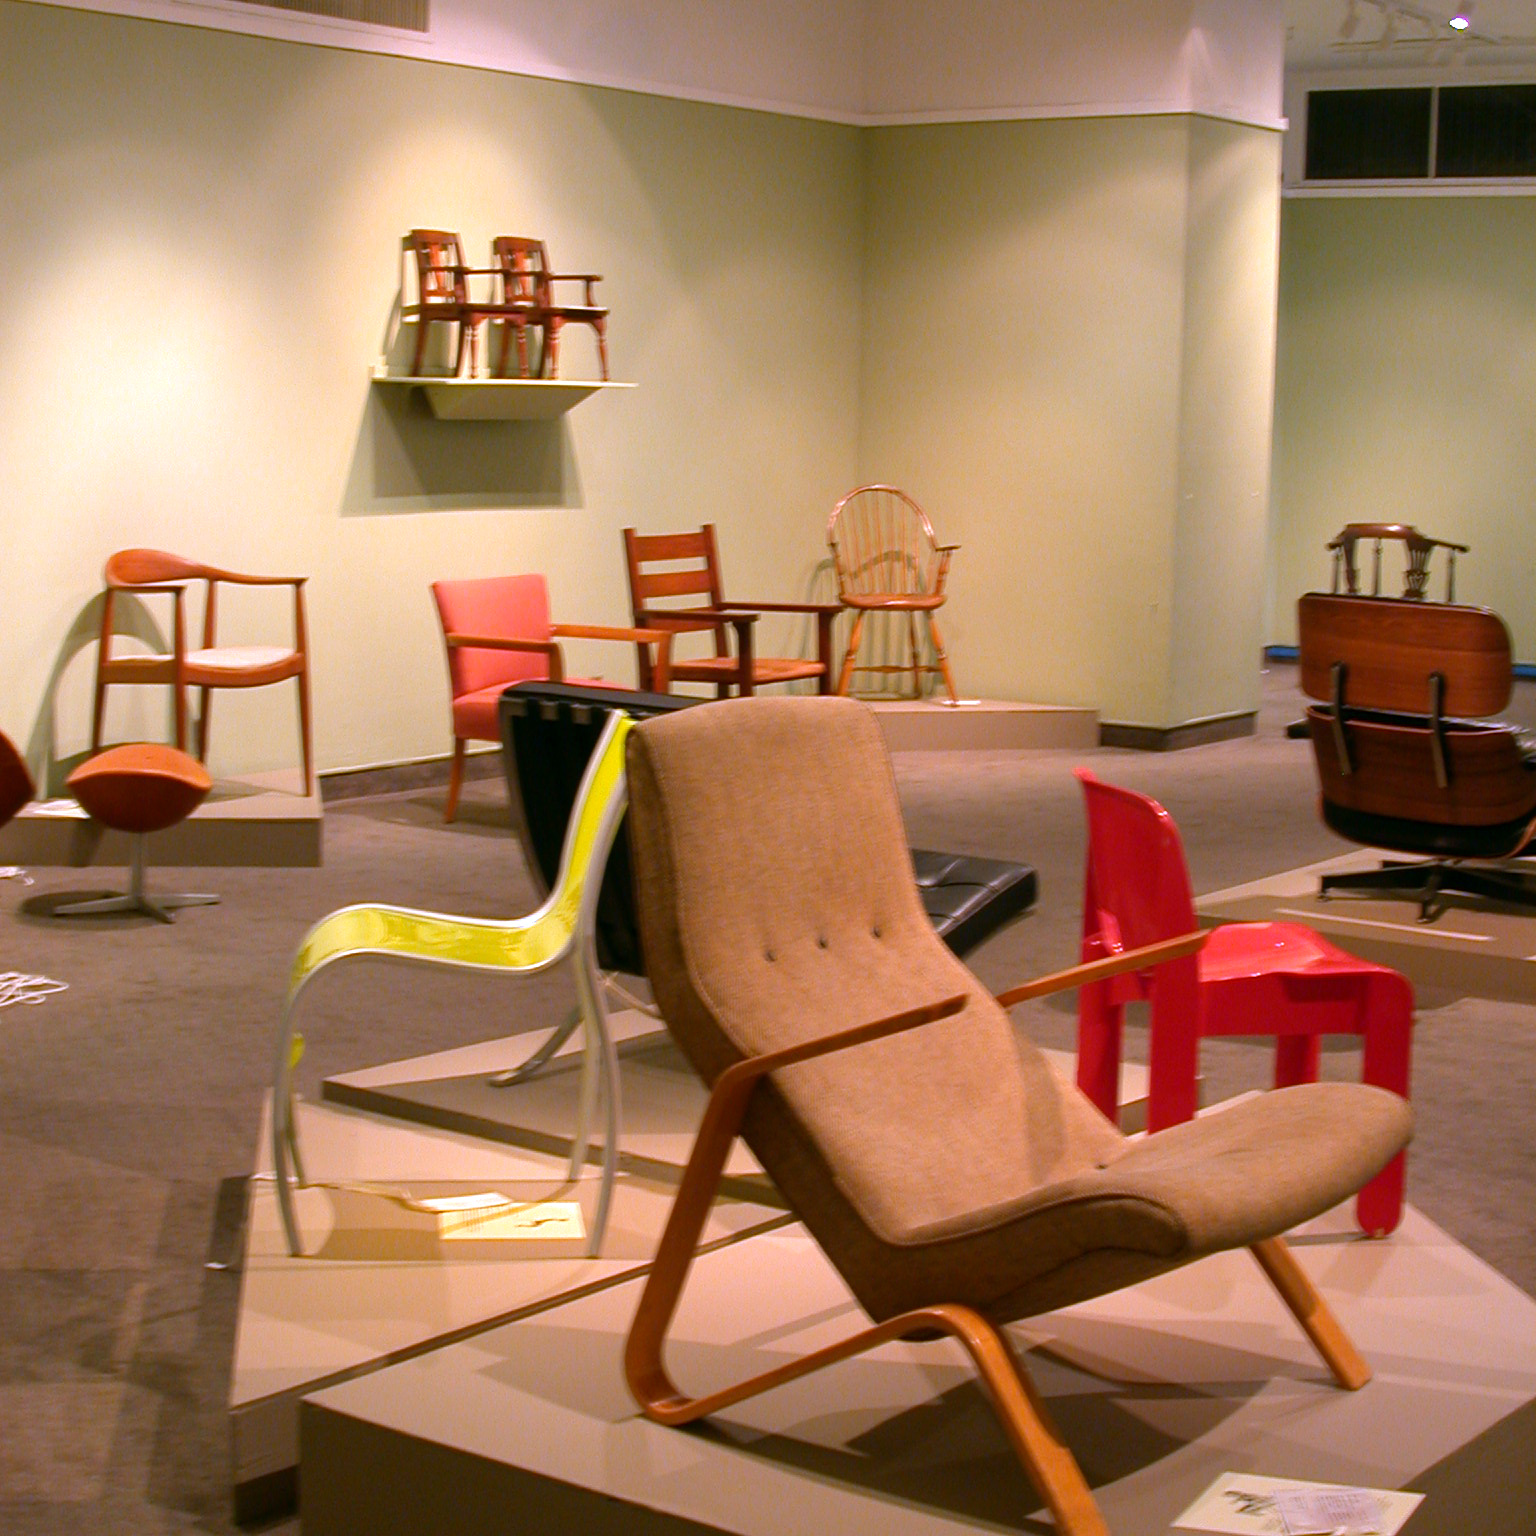 The Chair: 125 Years Of Sitting chairs on display